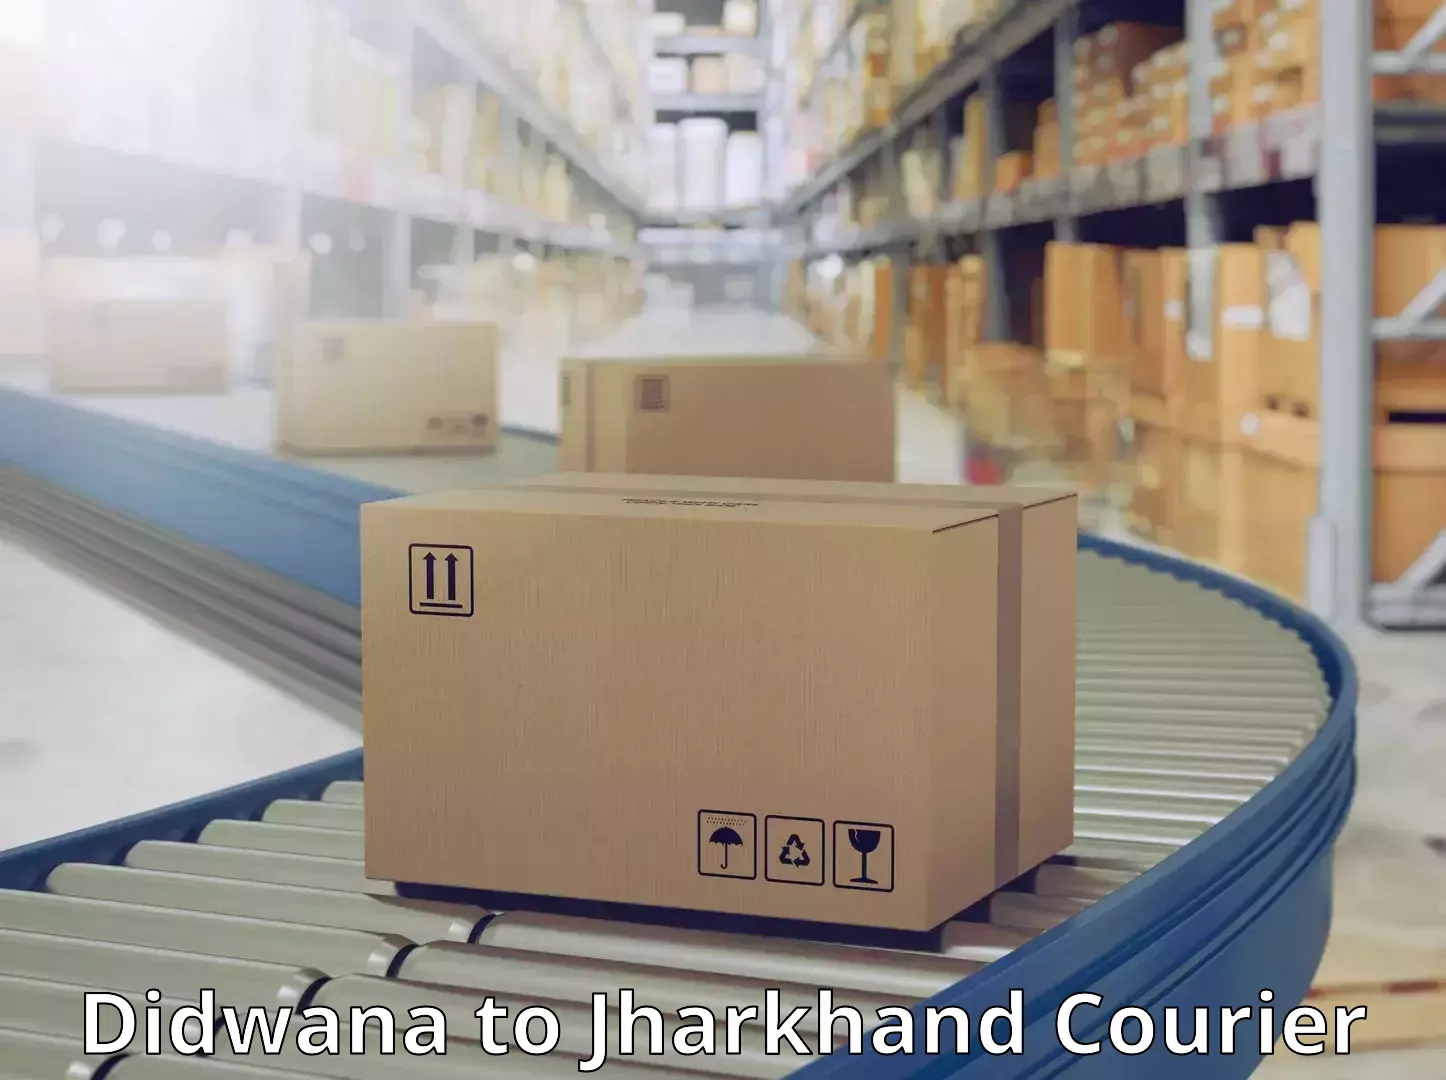 Nationwide delivery network in Didwana to Jharkhand